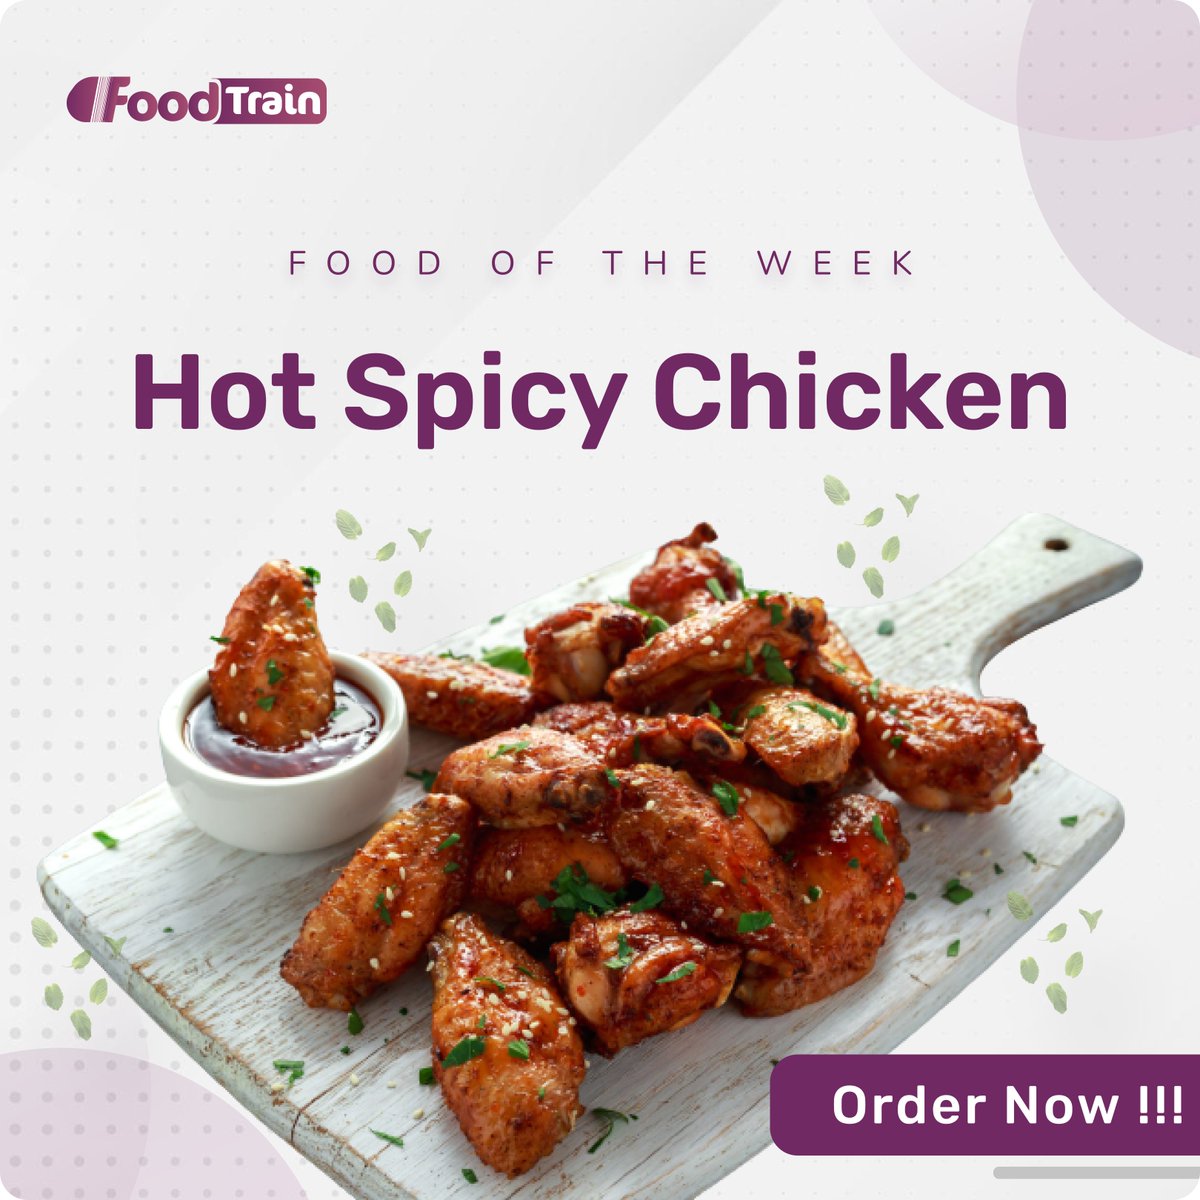 Our Food of the week is - 'Hot Spicy Chicken'.💃 

Order now and enjoy your meal.😋

Happy Monday.💜

#FoodTrain
#beautifulday
#happymonday
#hotspicychicken
#ordernow
#eatwell
#goodfood
#foodforall